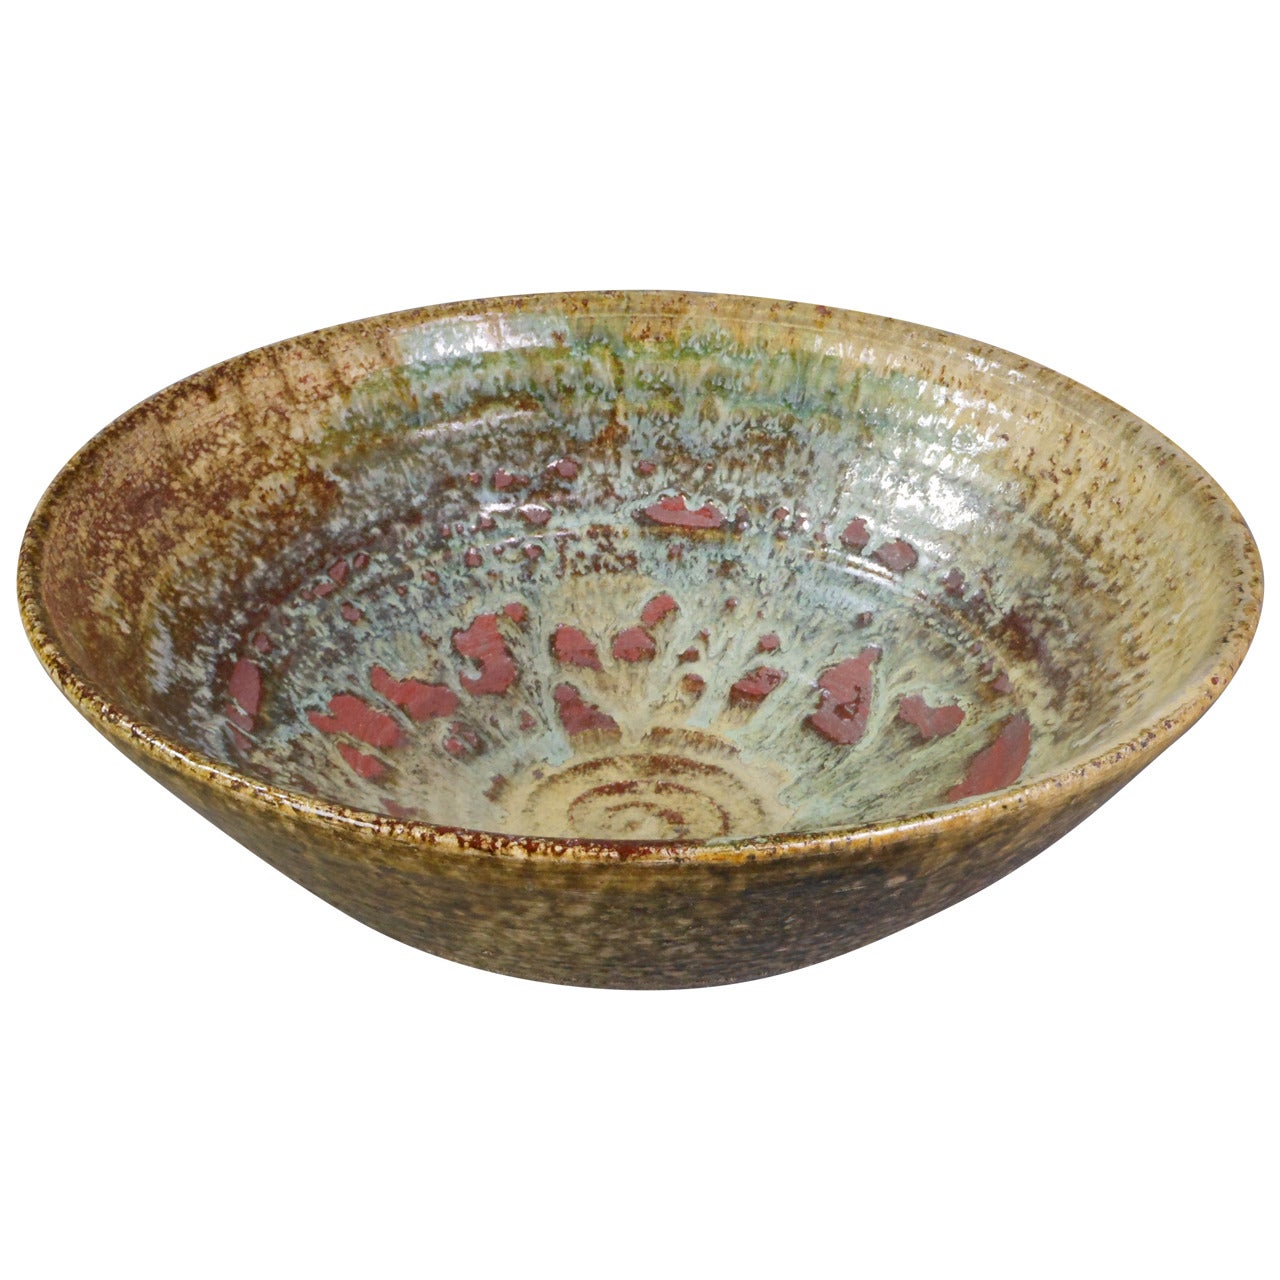 Mottled Brown and Green Glazed Stoneware Bowl